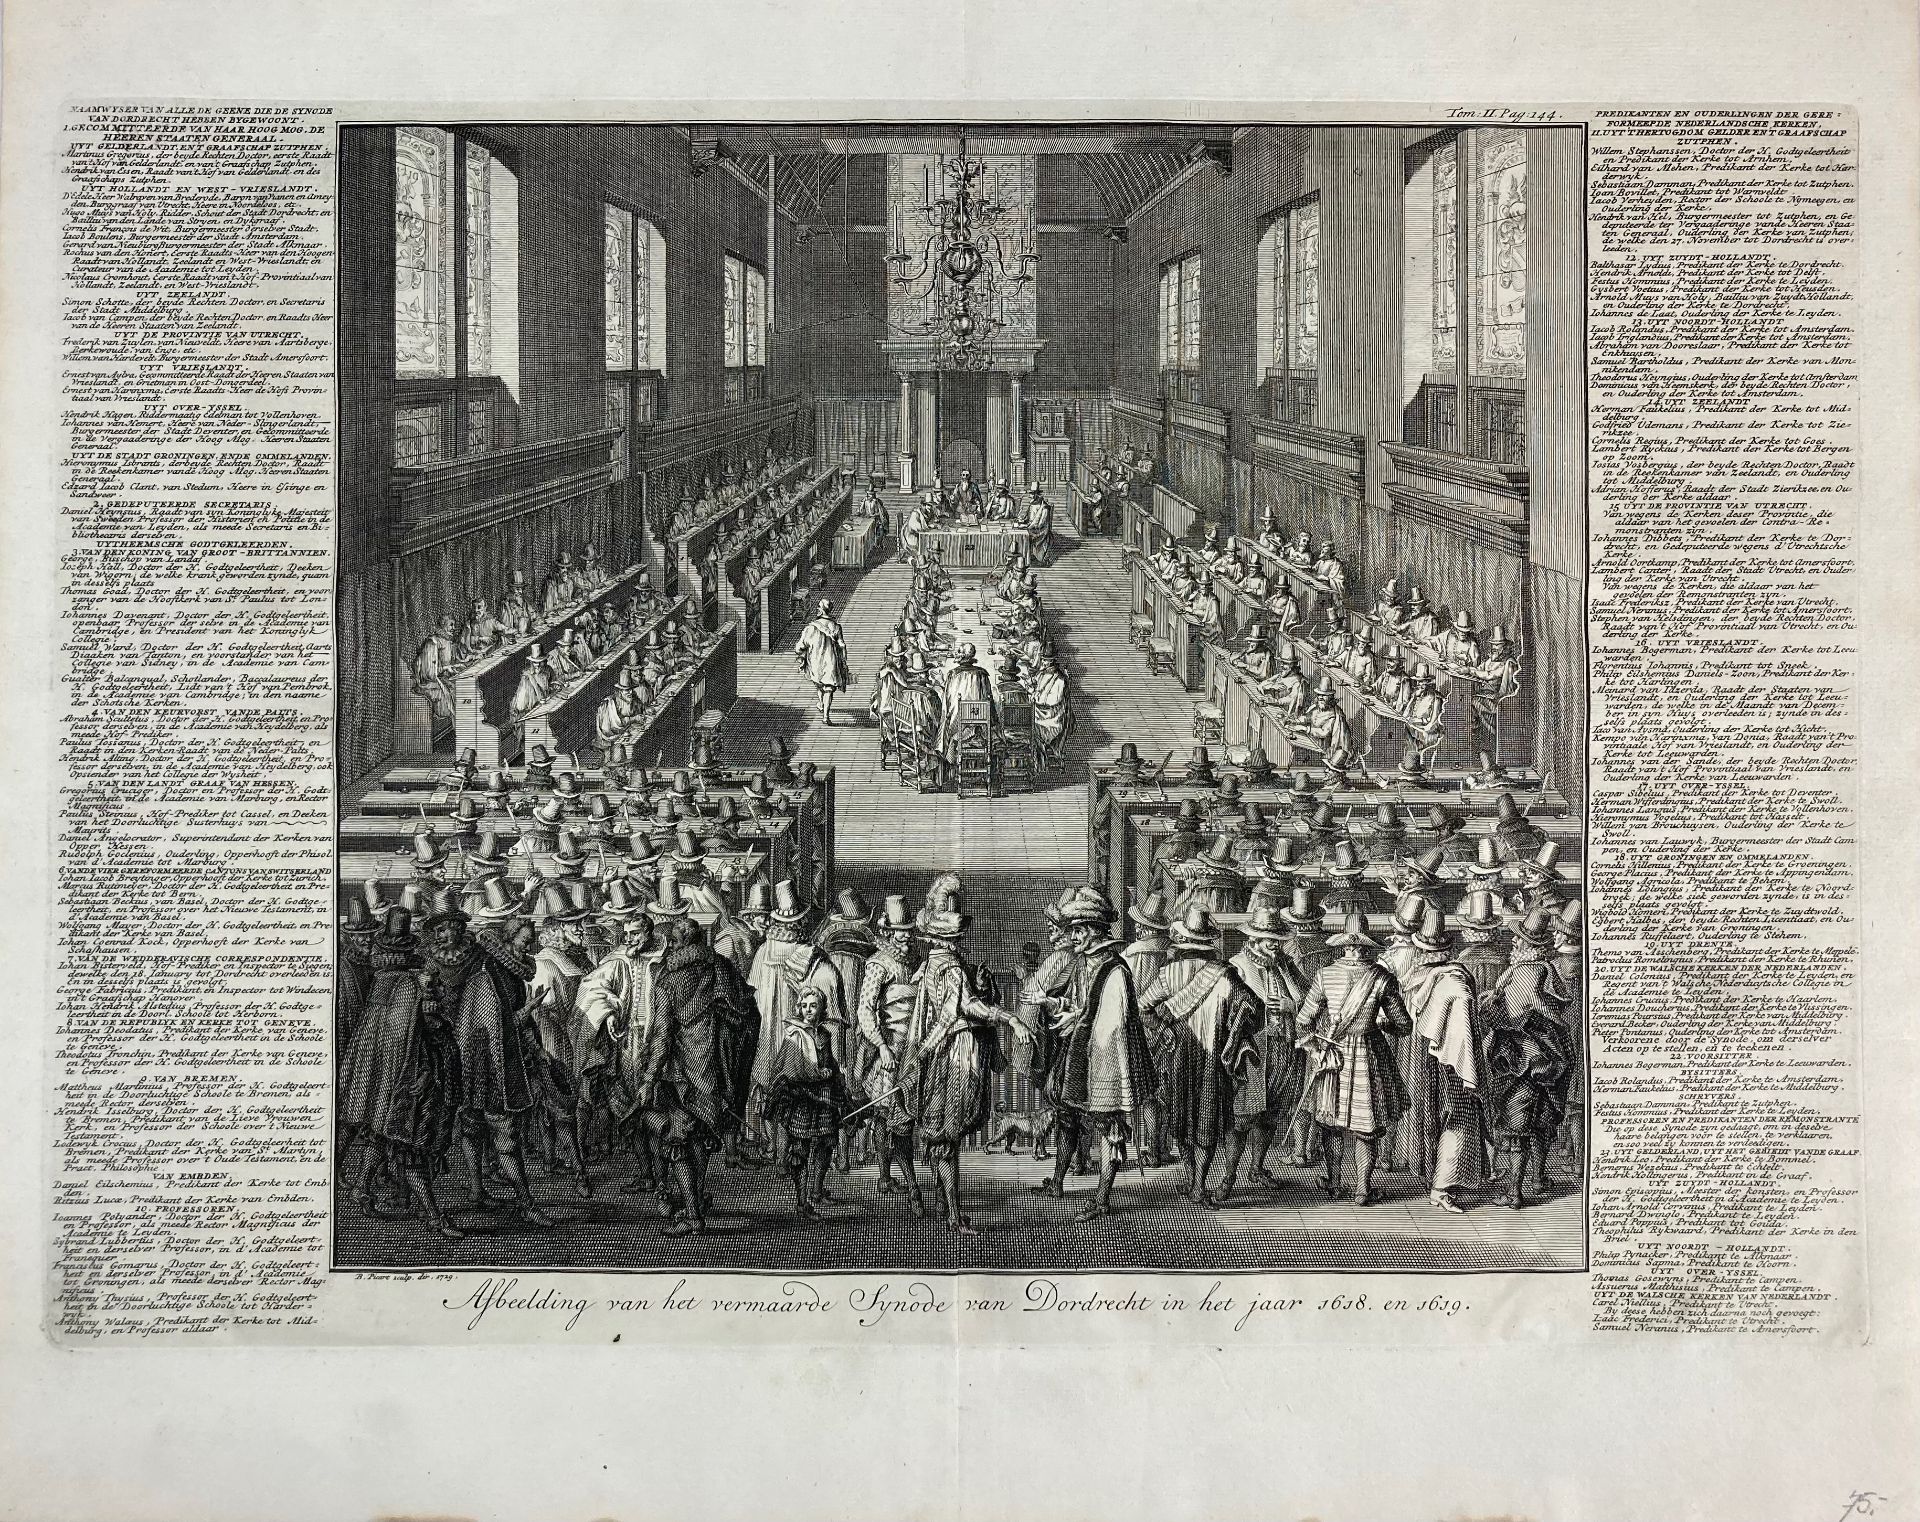 COLLECTION of 74 engraved plates representing Dutch historical events, coronations/ceremonies, gathe - Image 6 of 8